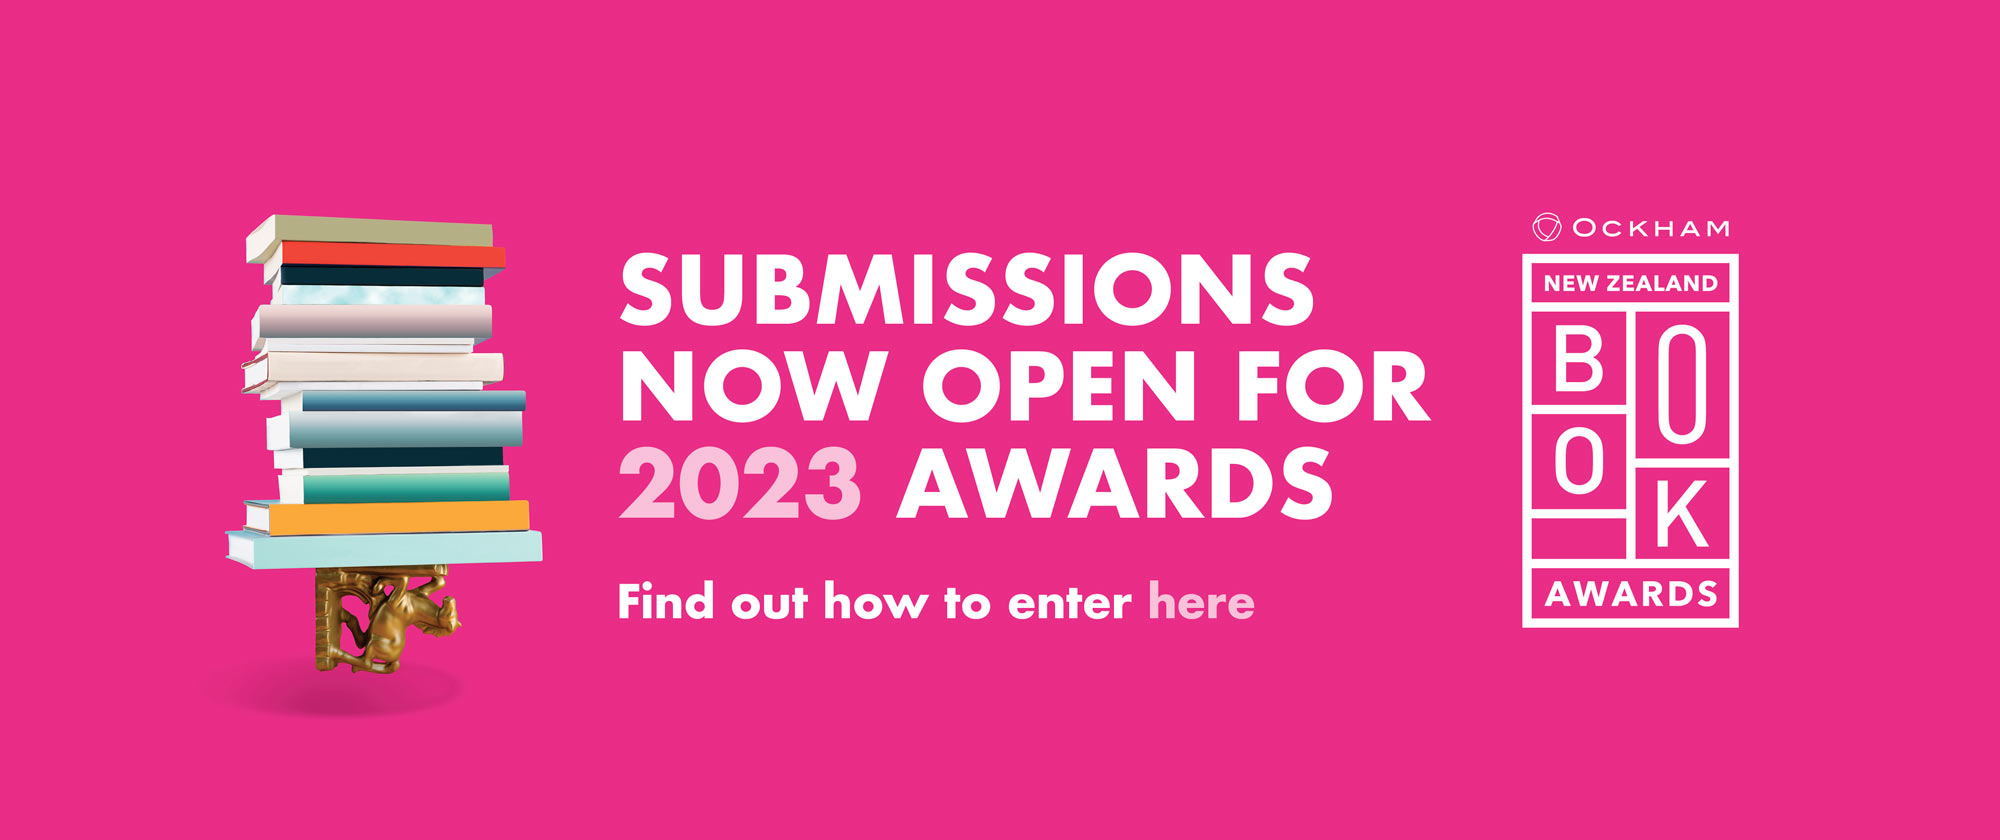 Submissions now open for 2023 Awards - Click here